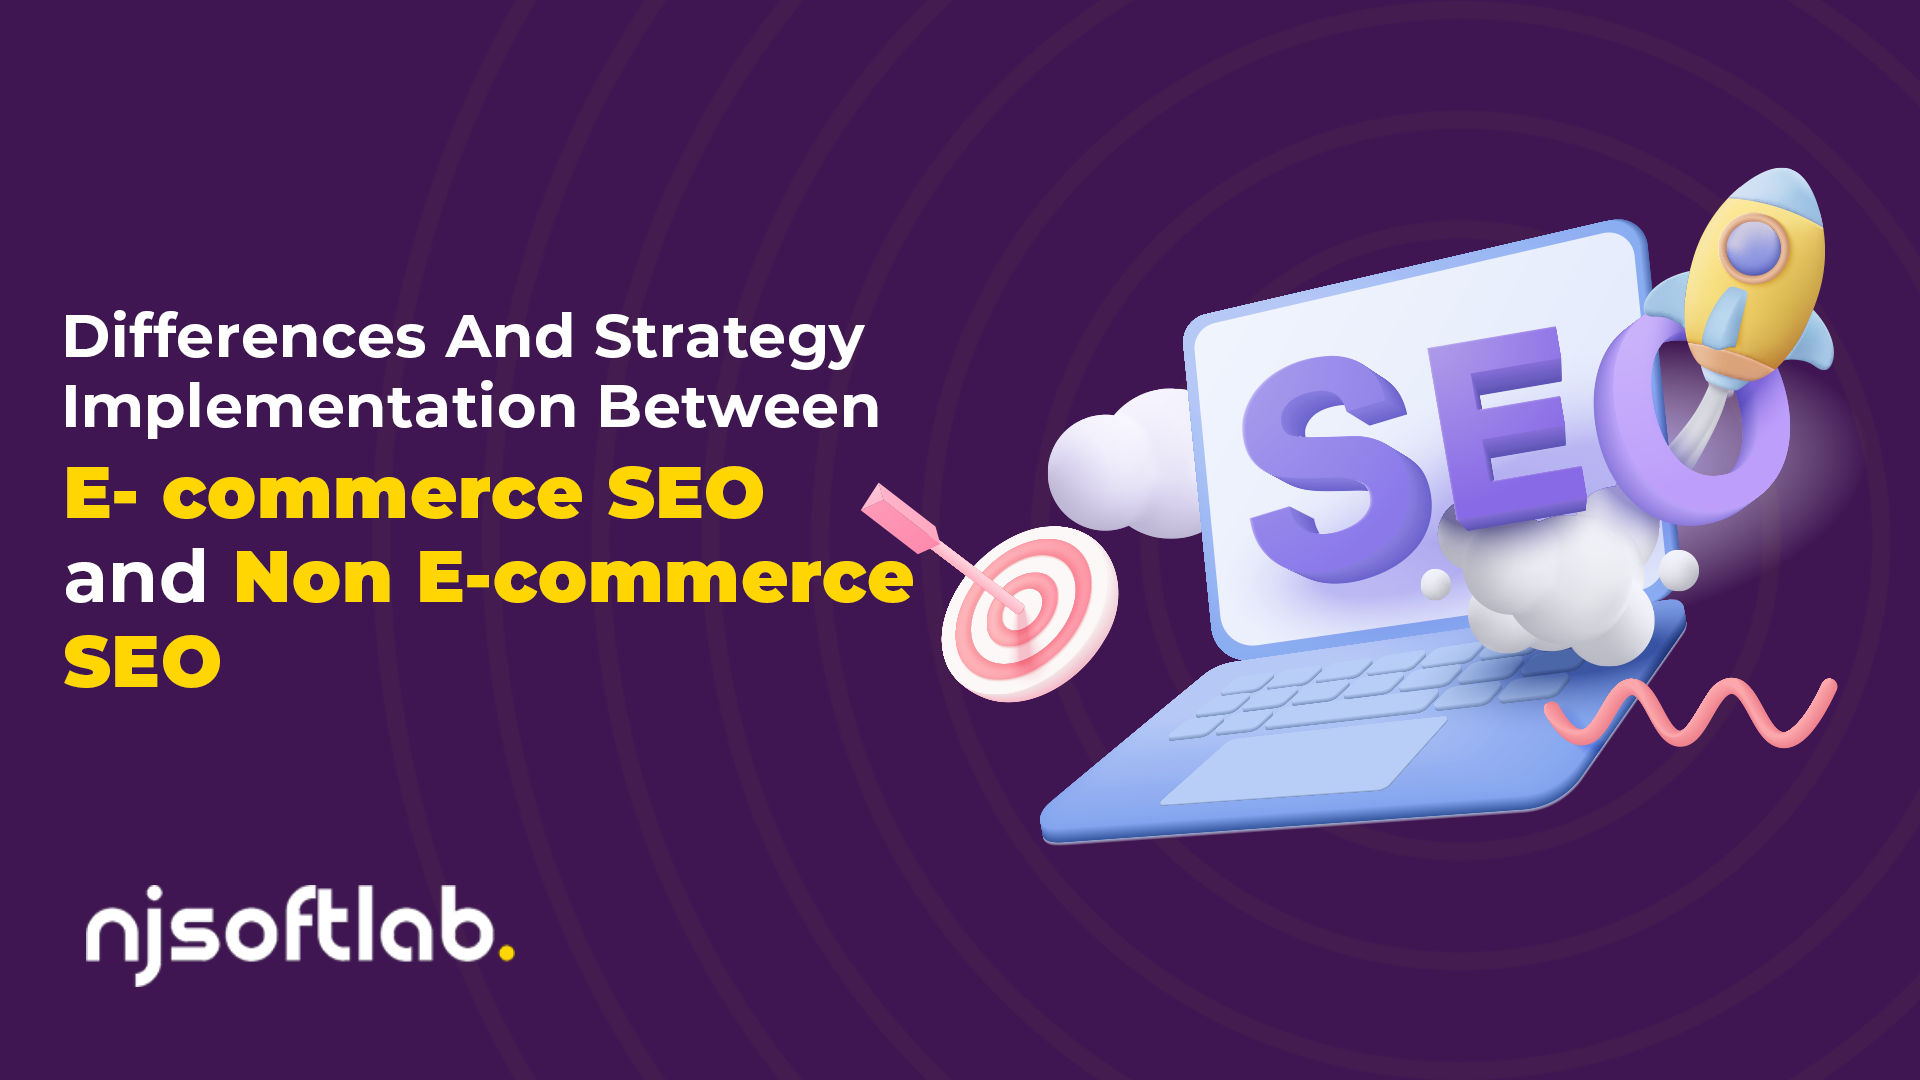 Differences And Strategy Implementation Between E-commerce SEO and Non E-commerce SEO